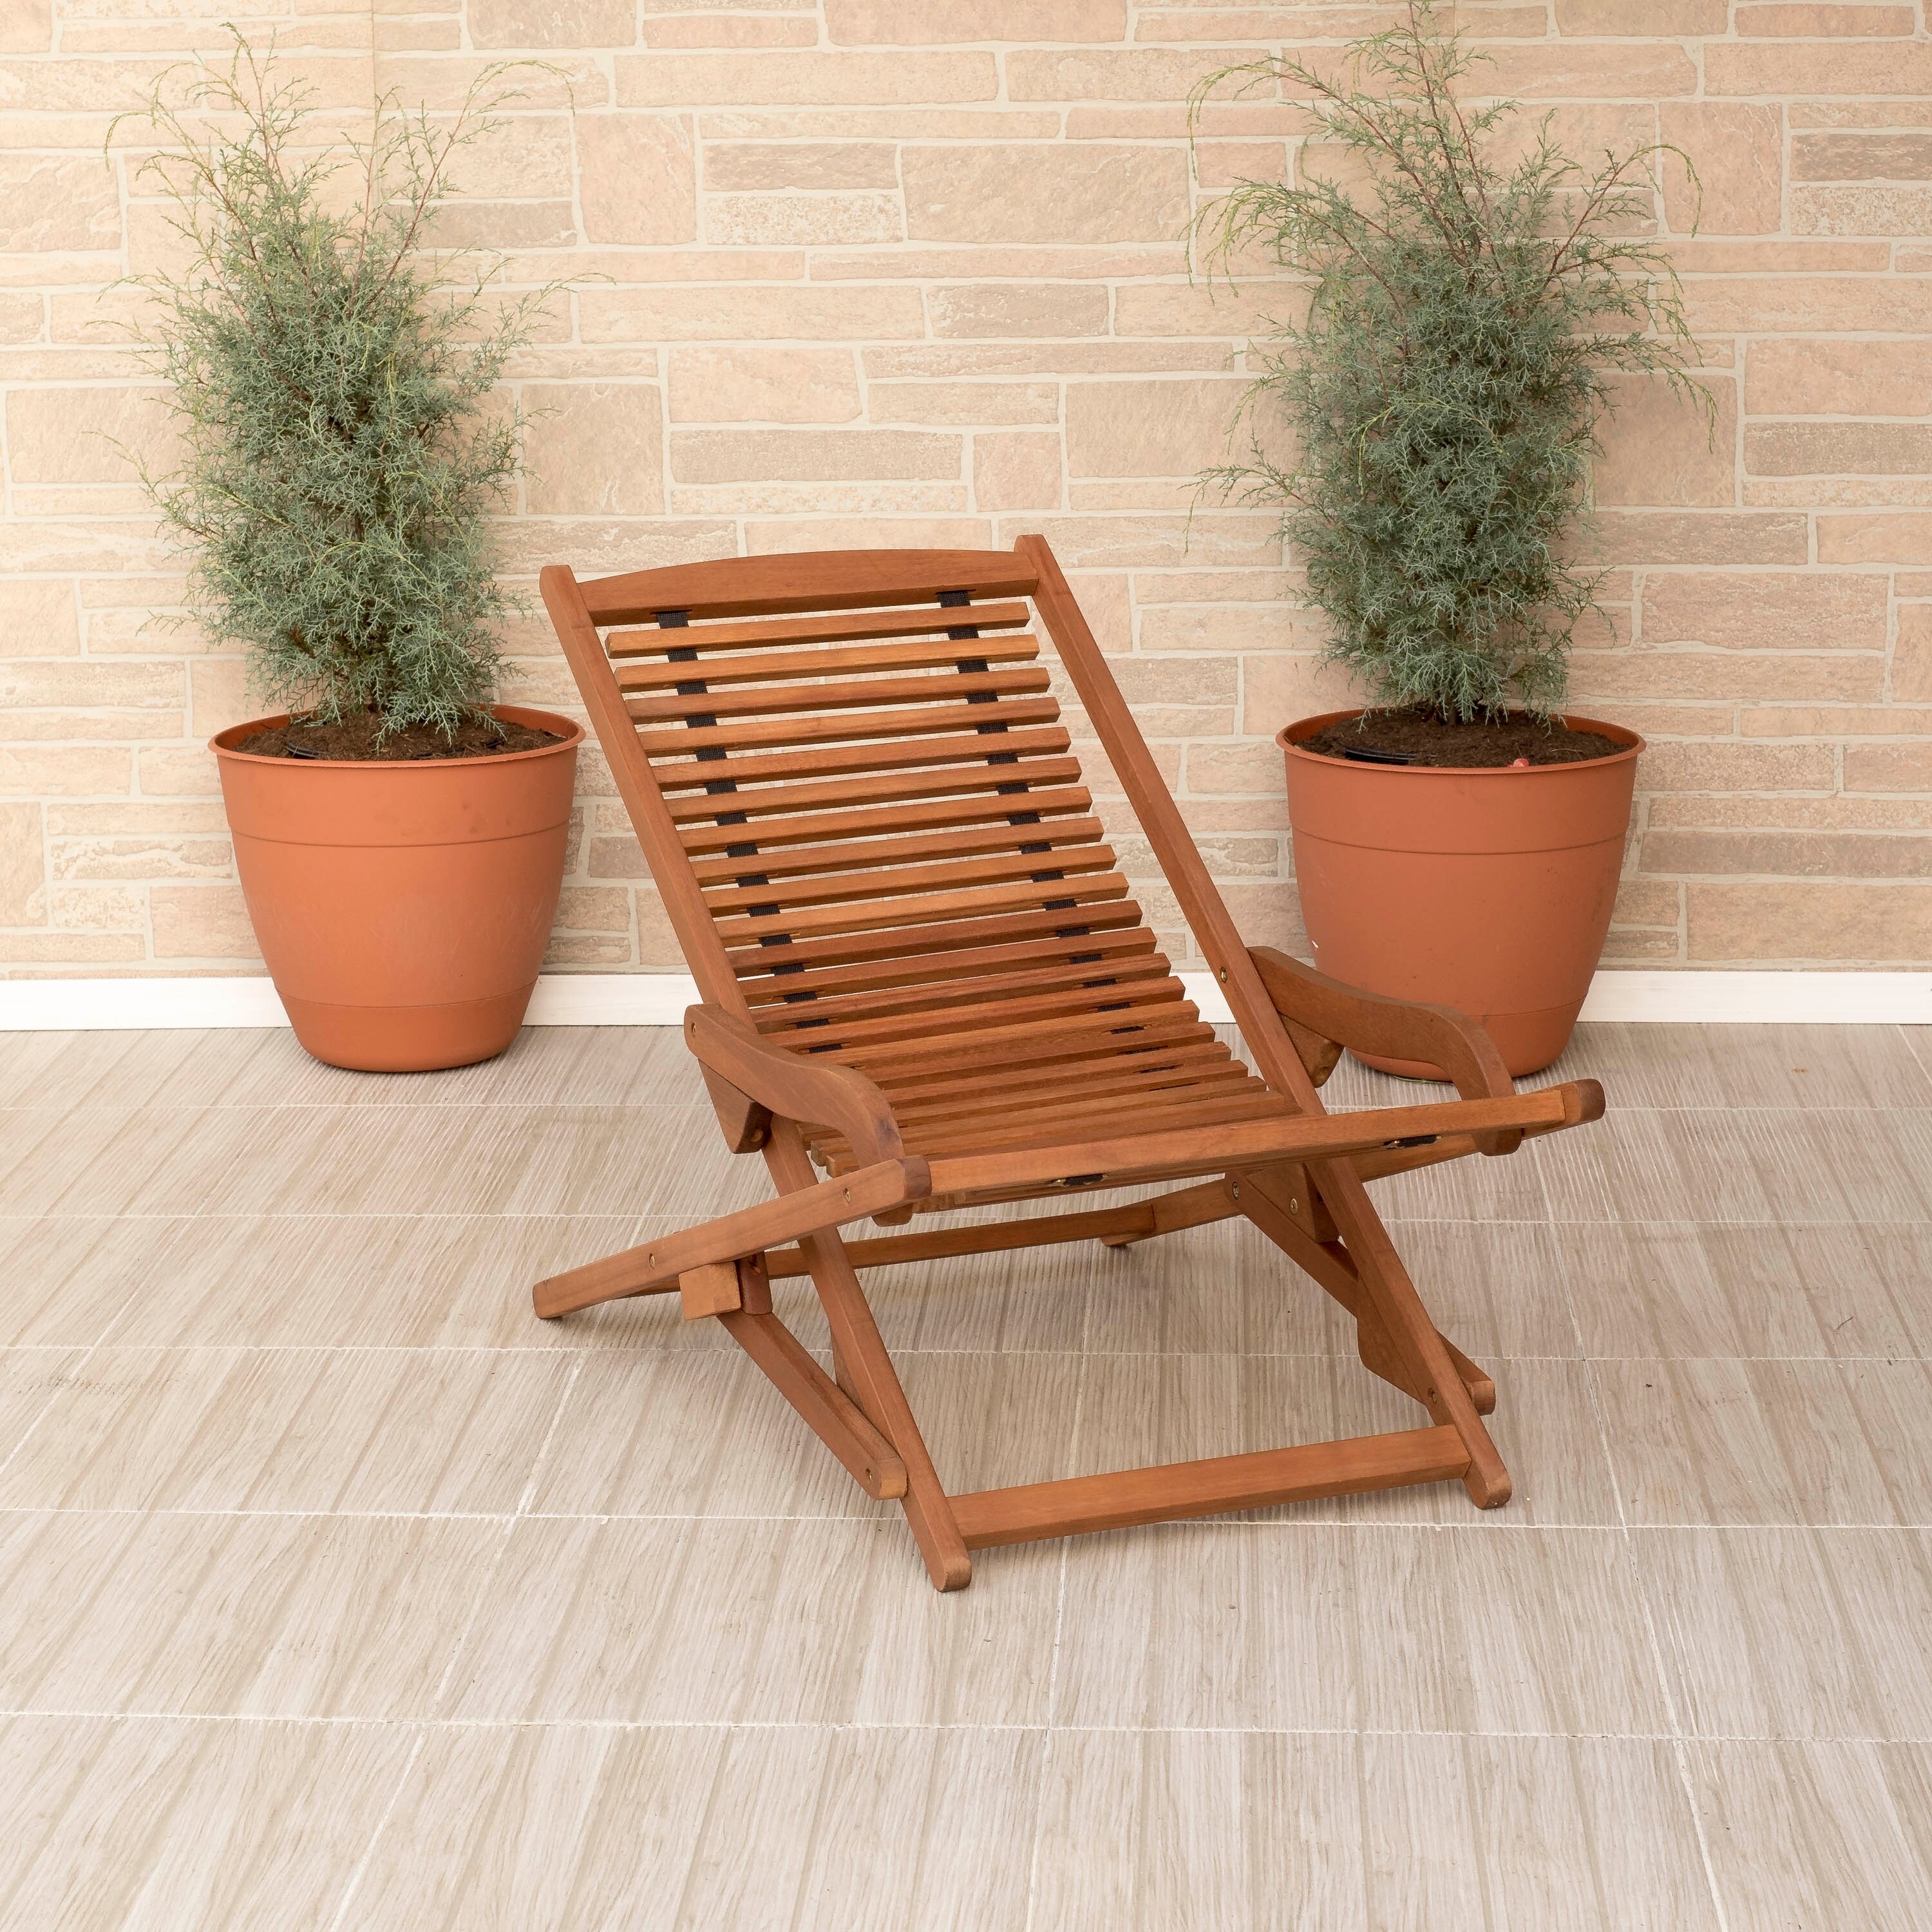 Chaise Lounges Buy Patio Furniture Online